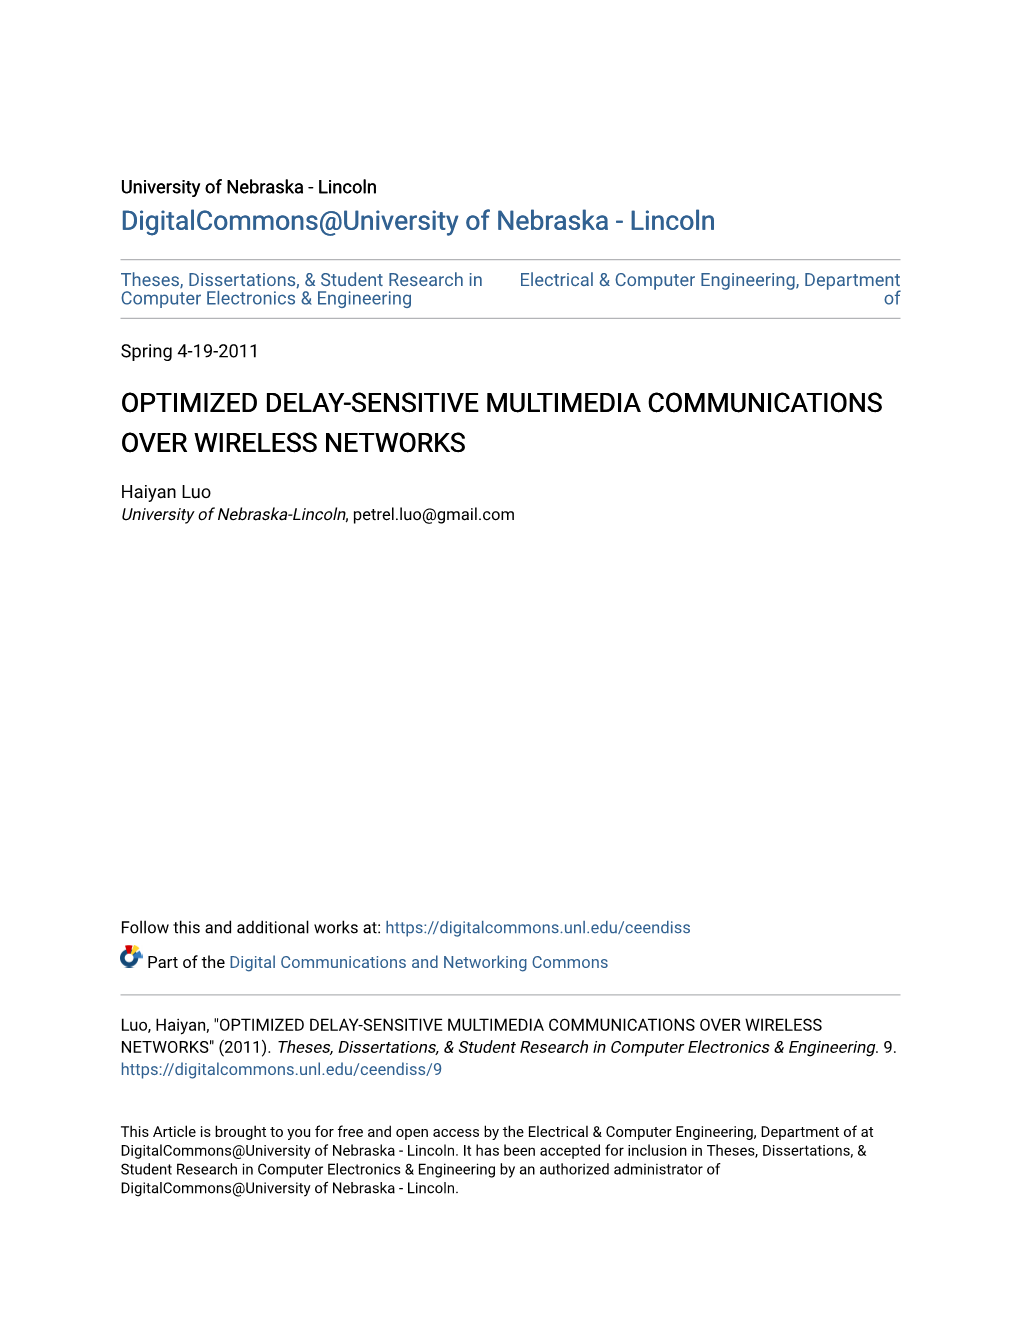 Optimized Delay-Sensitive Multimedia Communications Over Wireless Networks